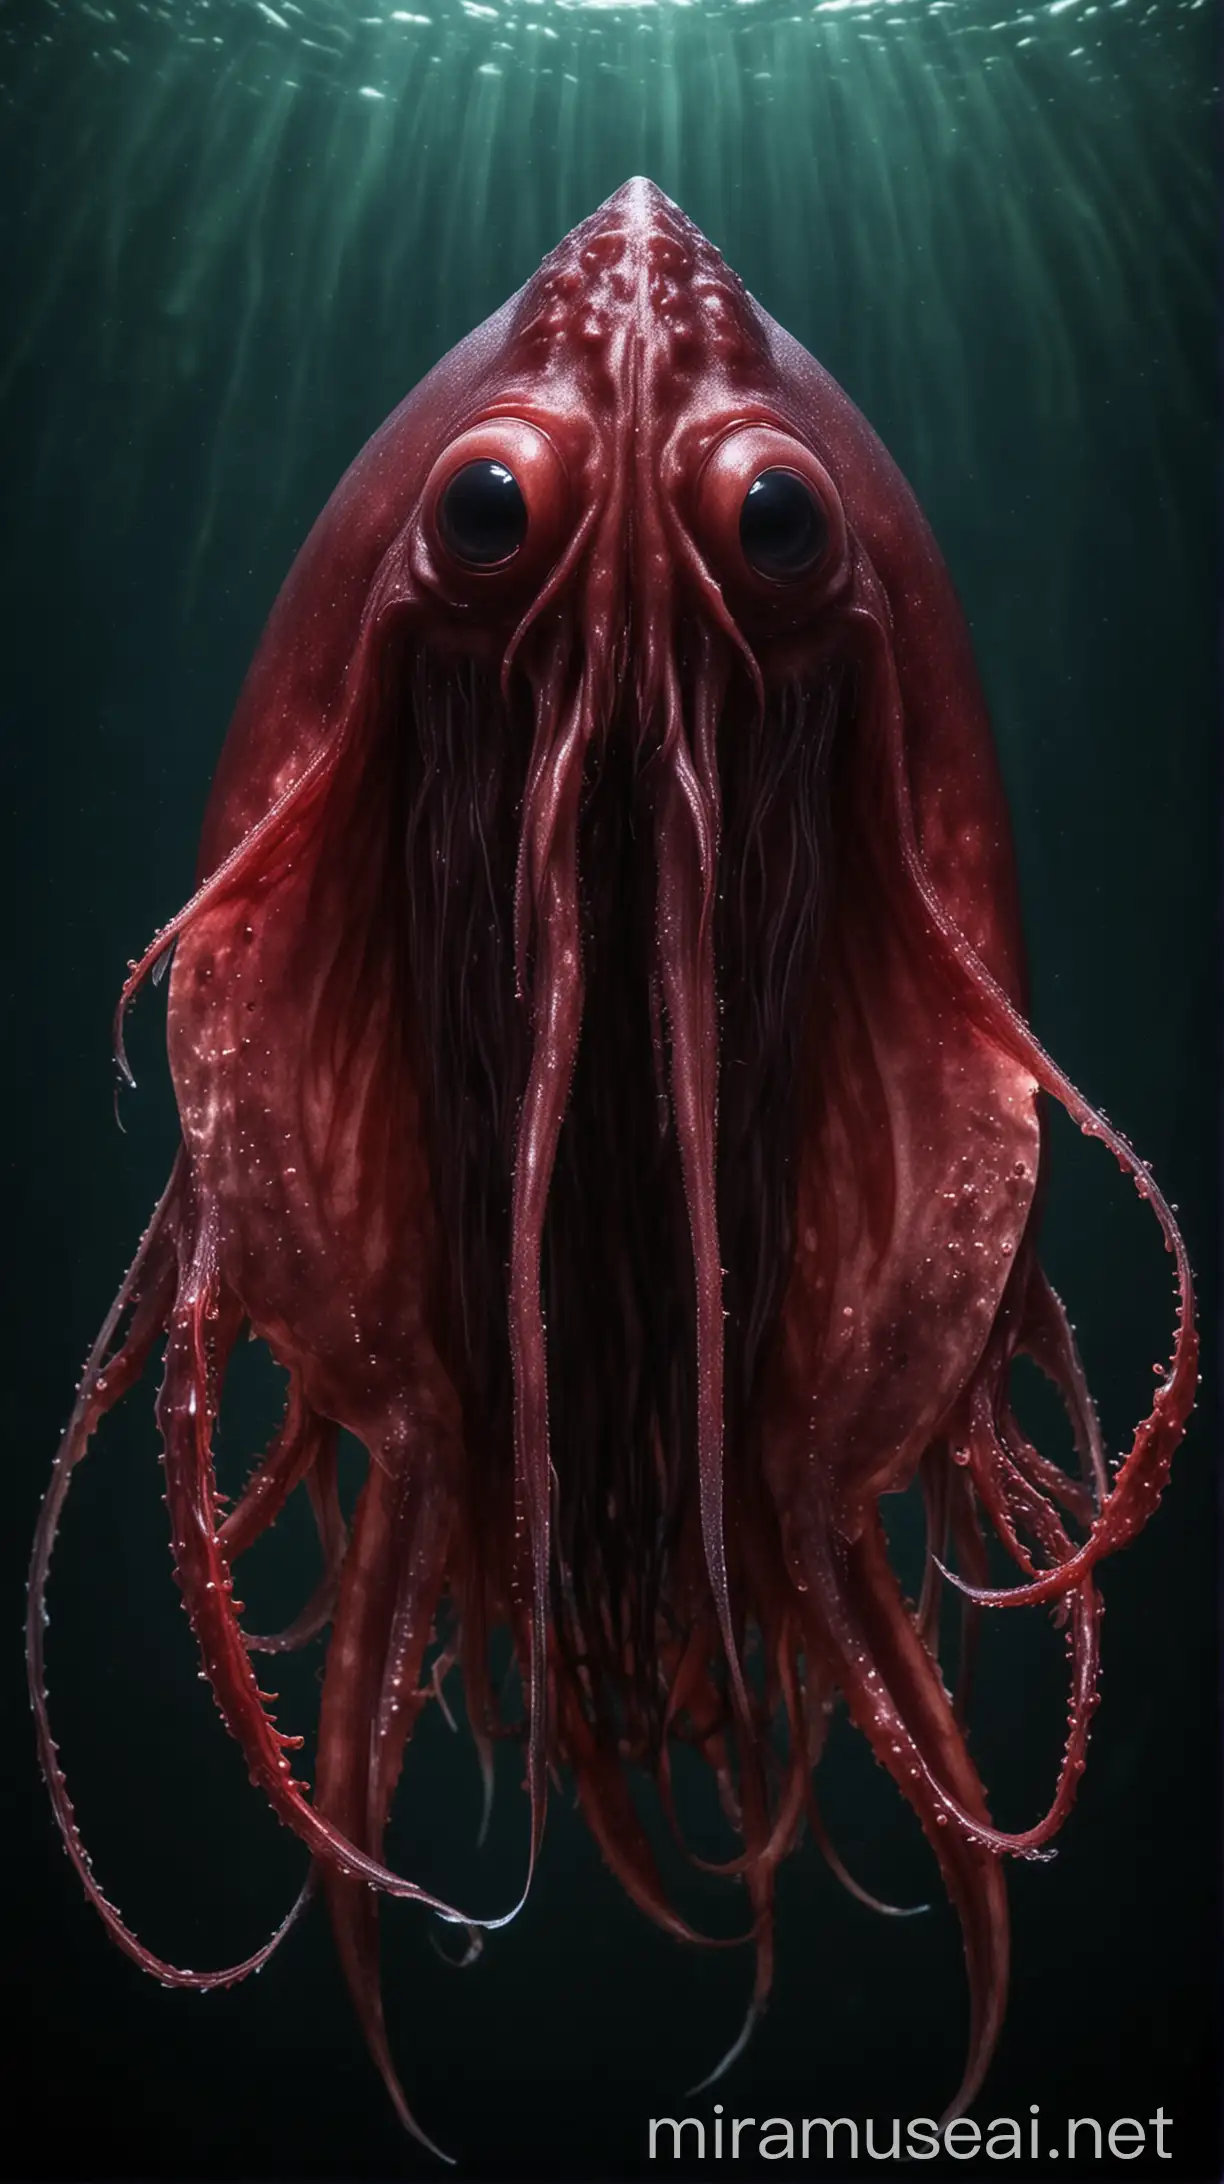 Terrifying image of a vampire squid. Make it look real